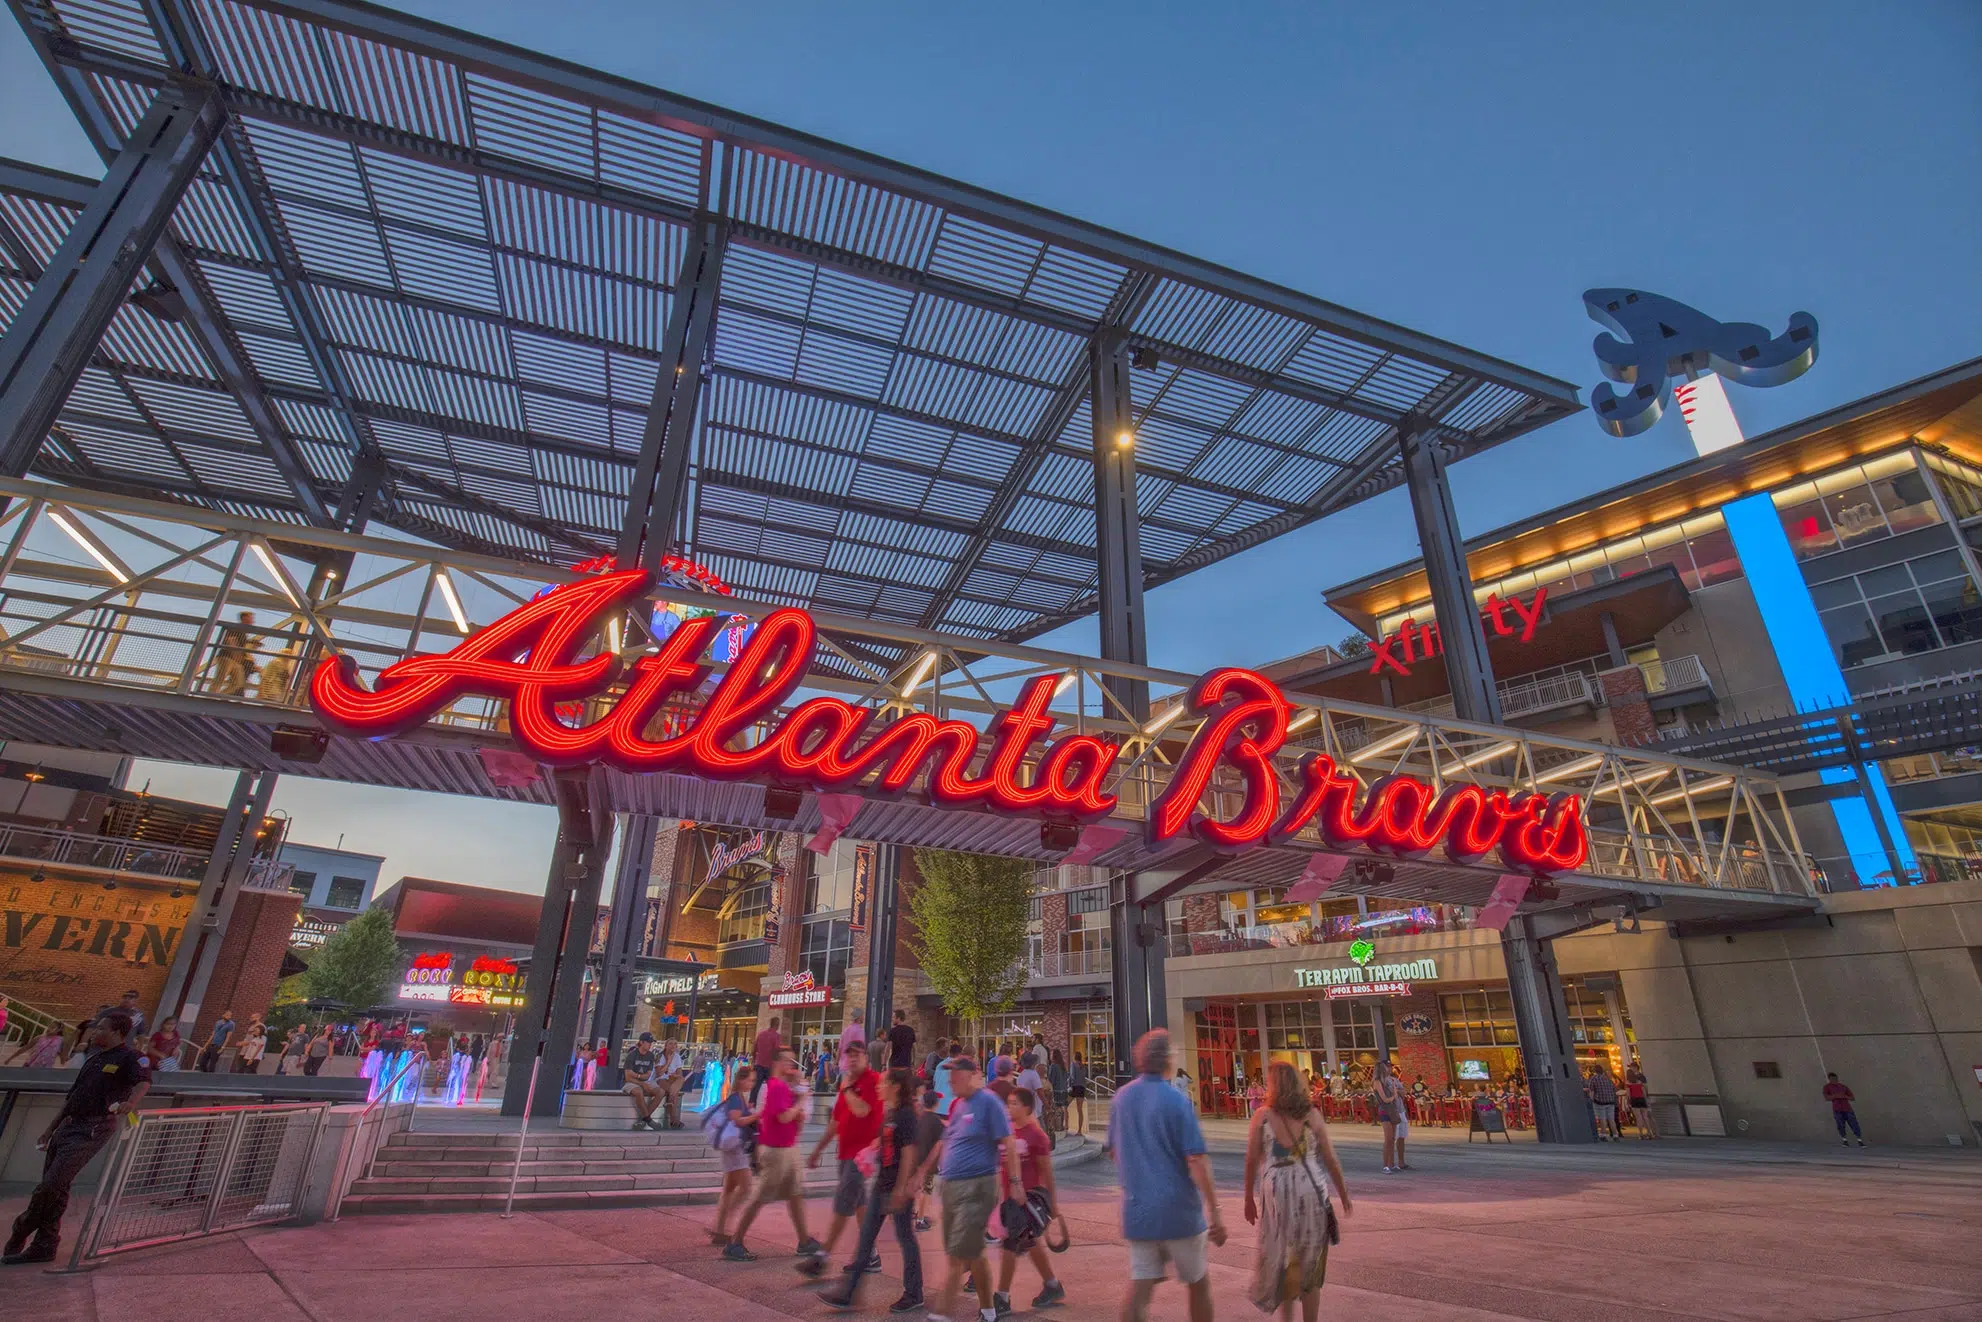 Atlanta Braves and Truist to Host Grand Opening of Home Run Market